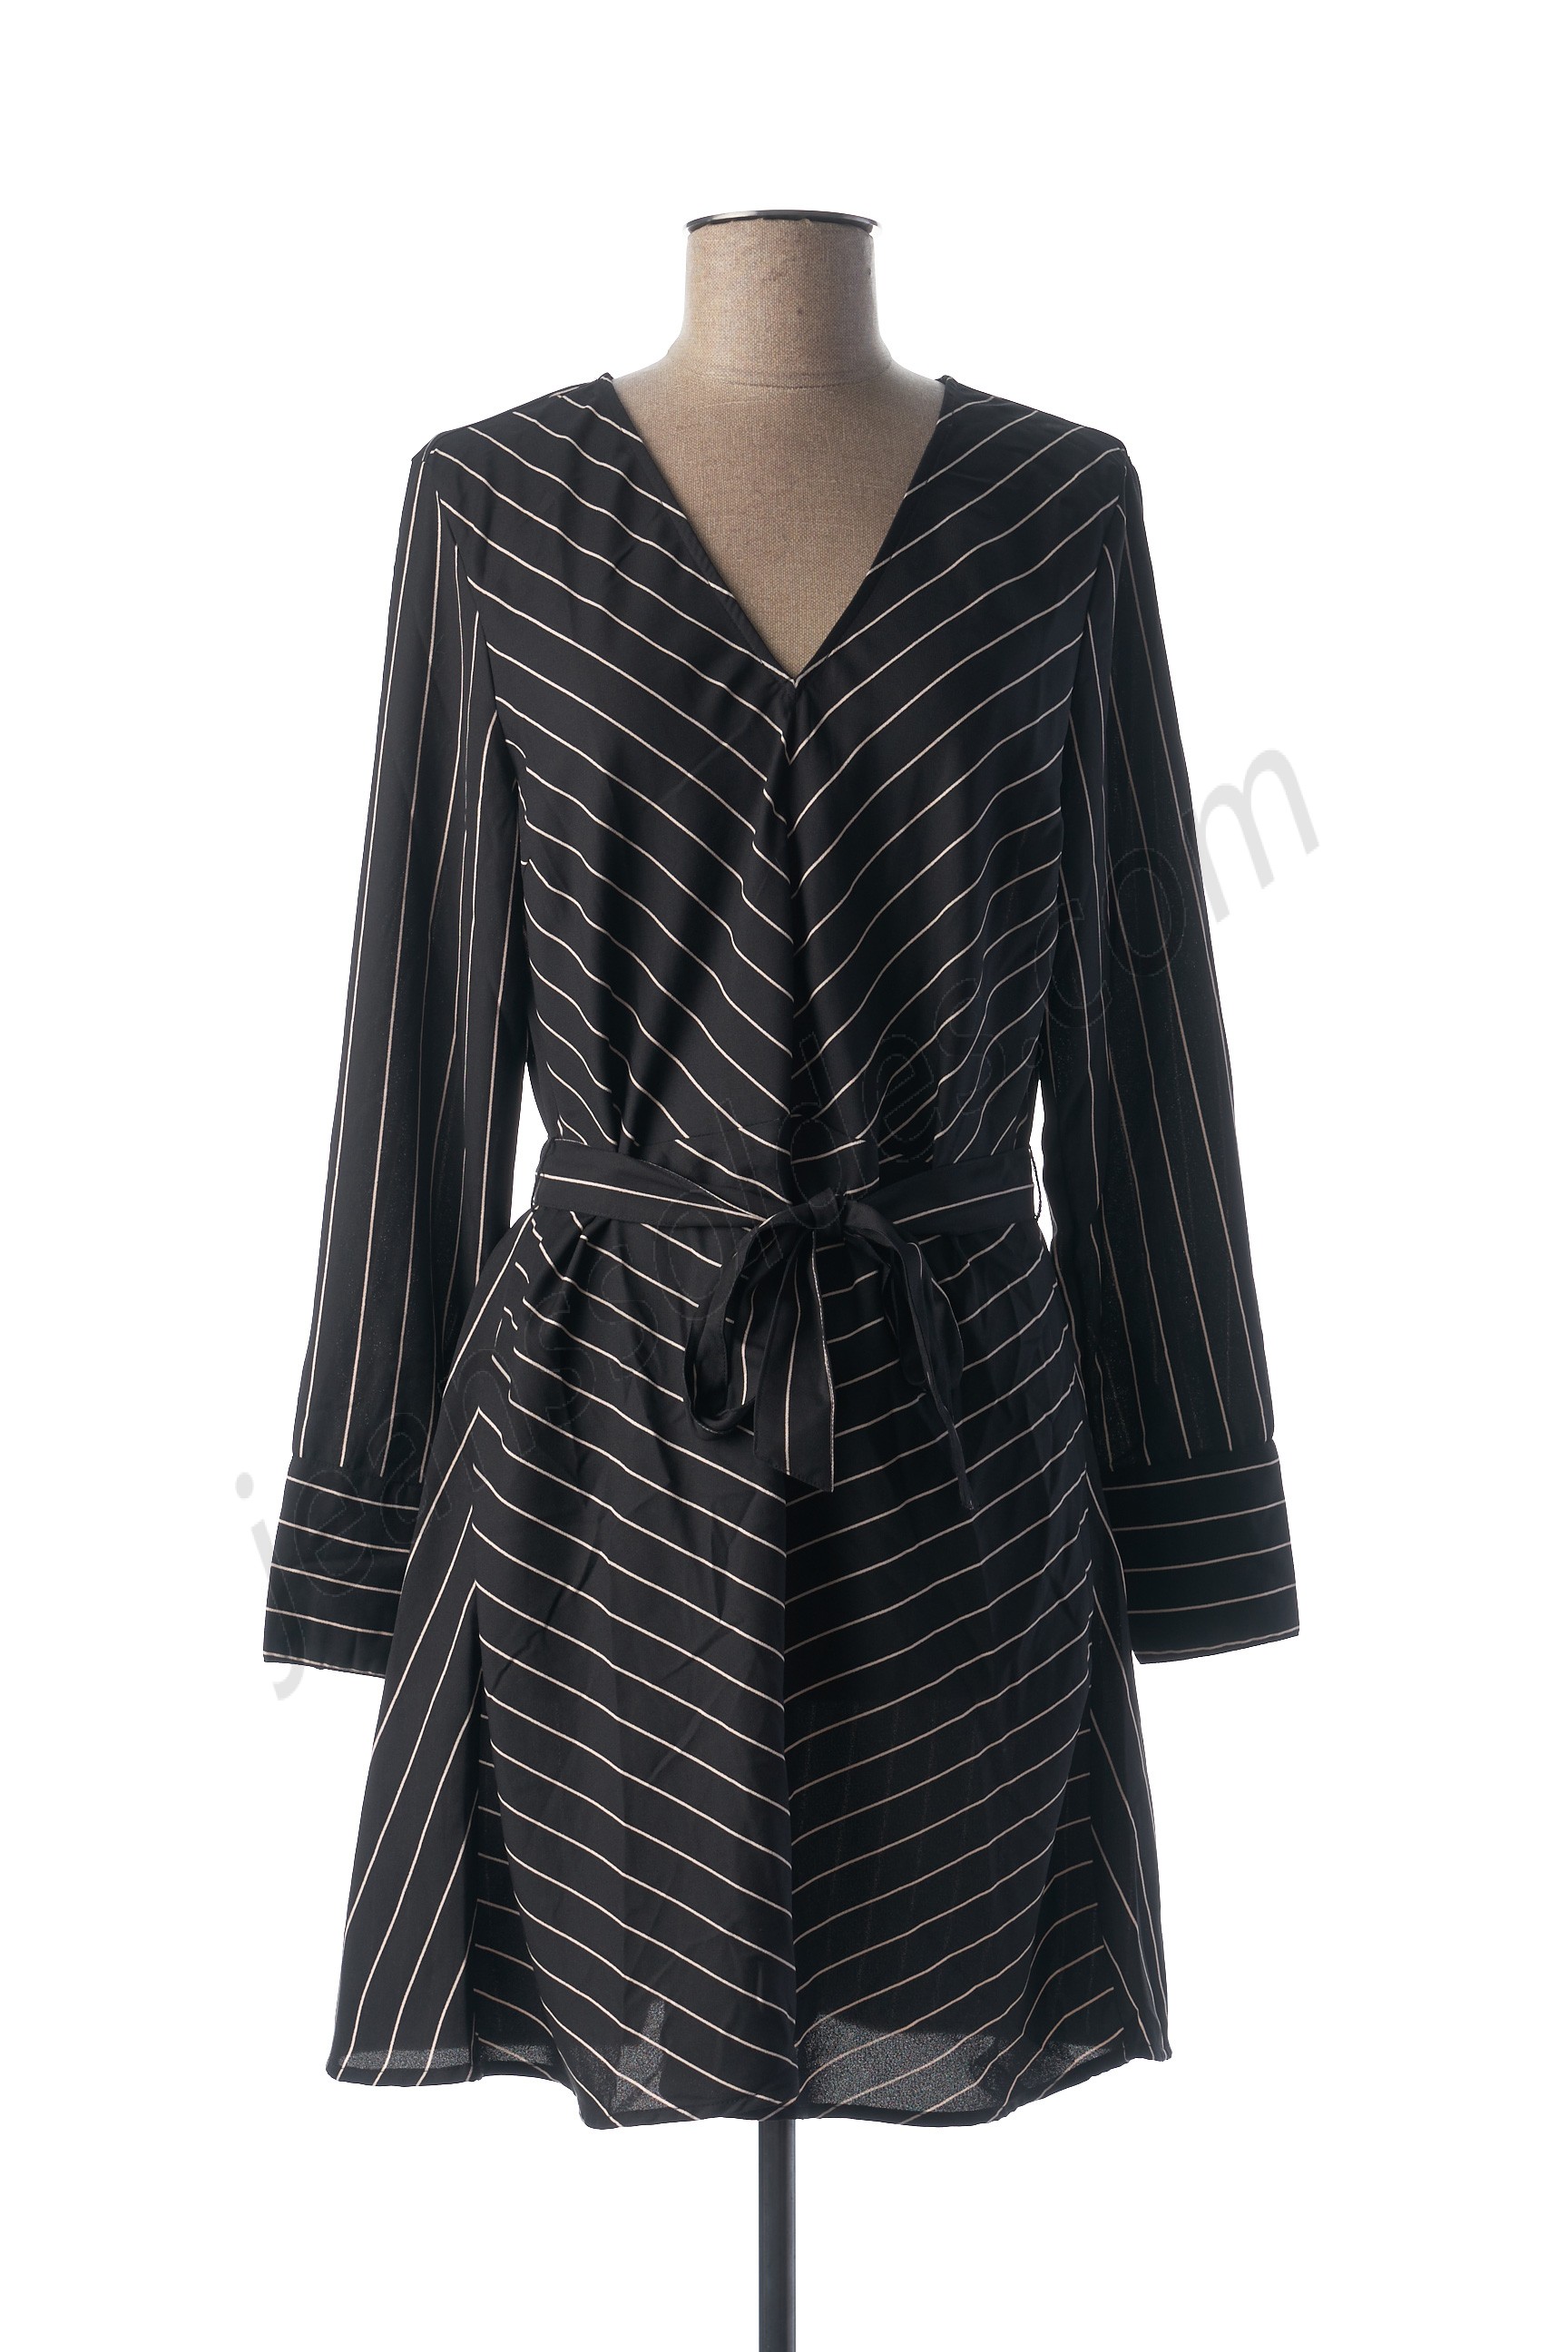 only-Robe courte déstockage - only-Robe courte déstockage